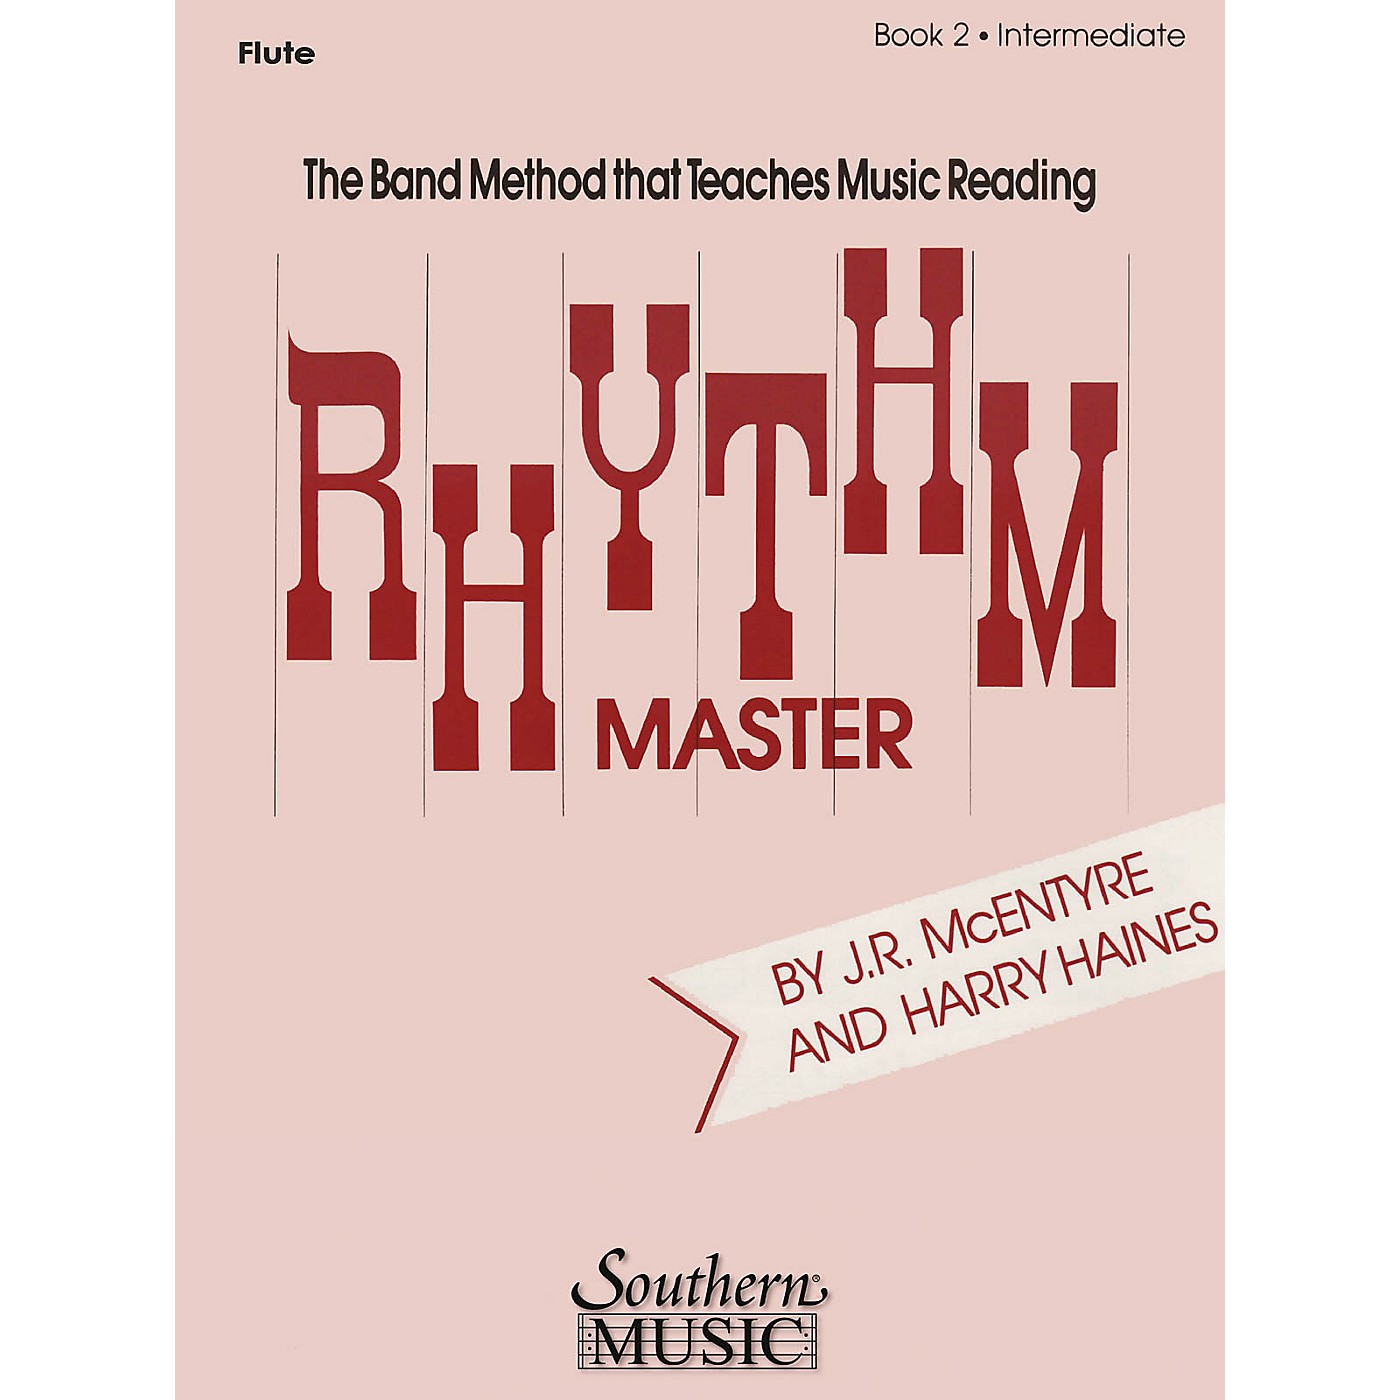 Southern Rhythm Master - Book 2 (Intermediate) (Oboe) Southern Music Series by Harry Haines thumbnail